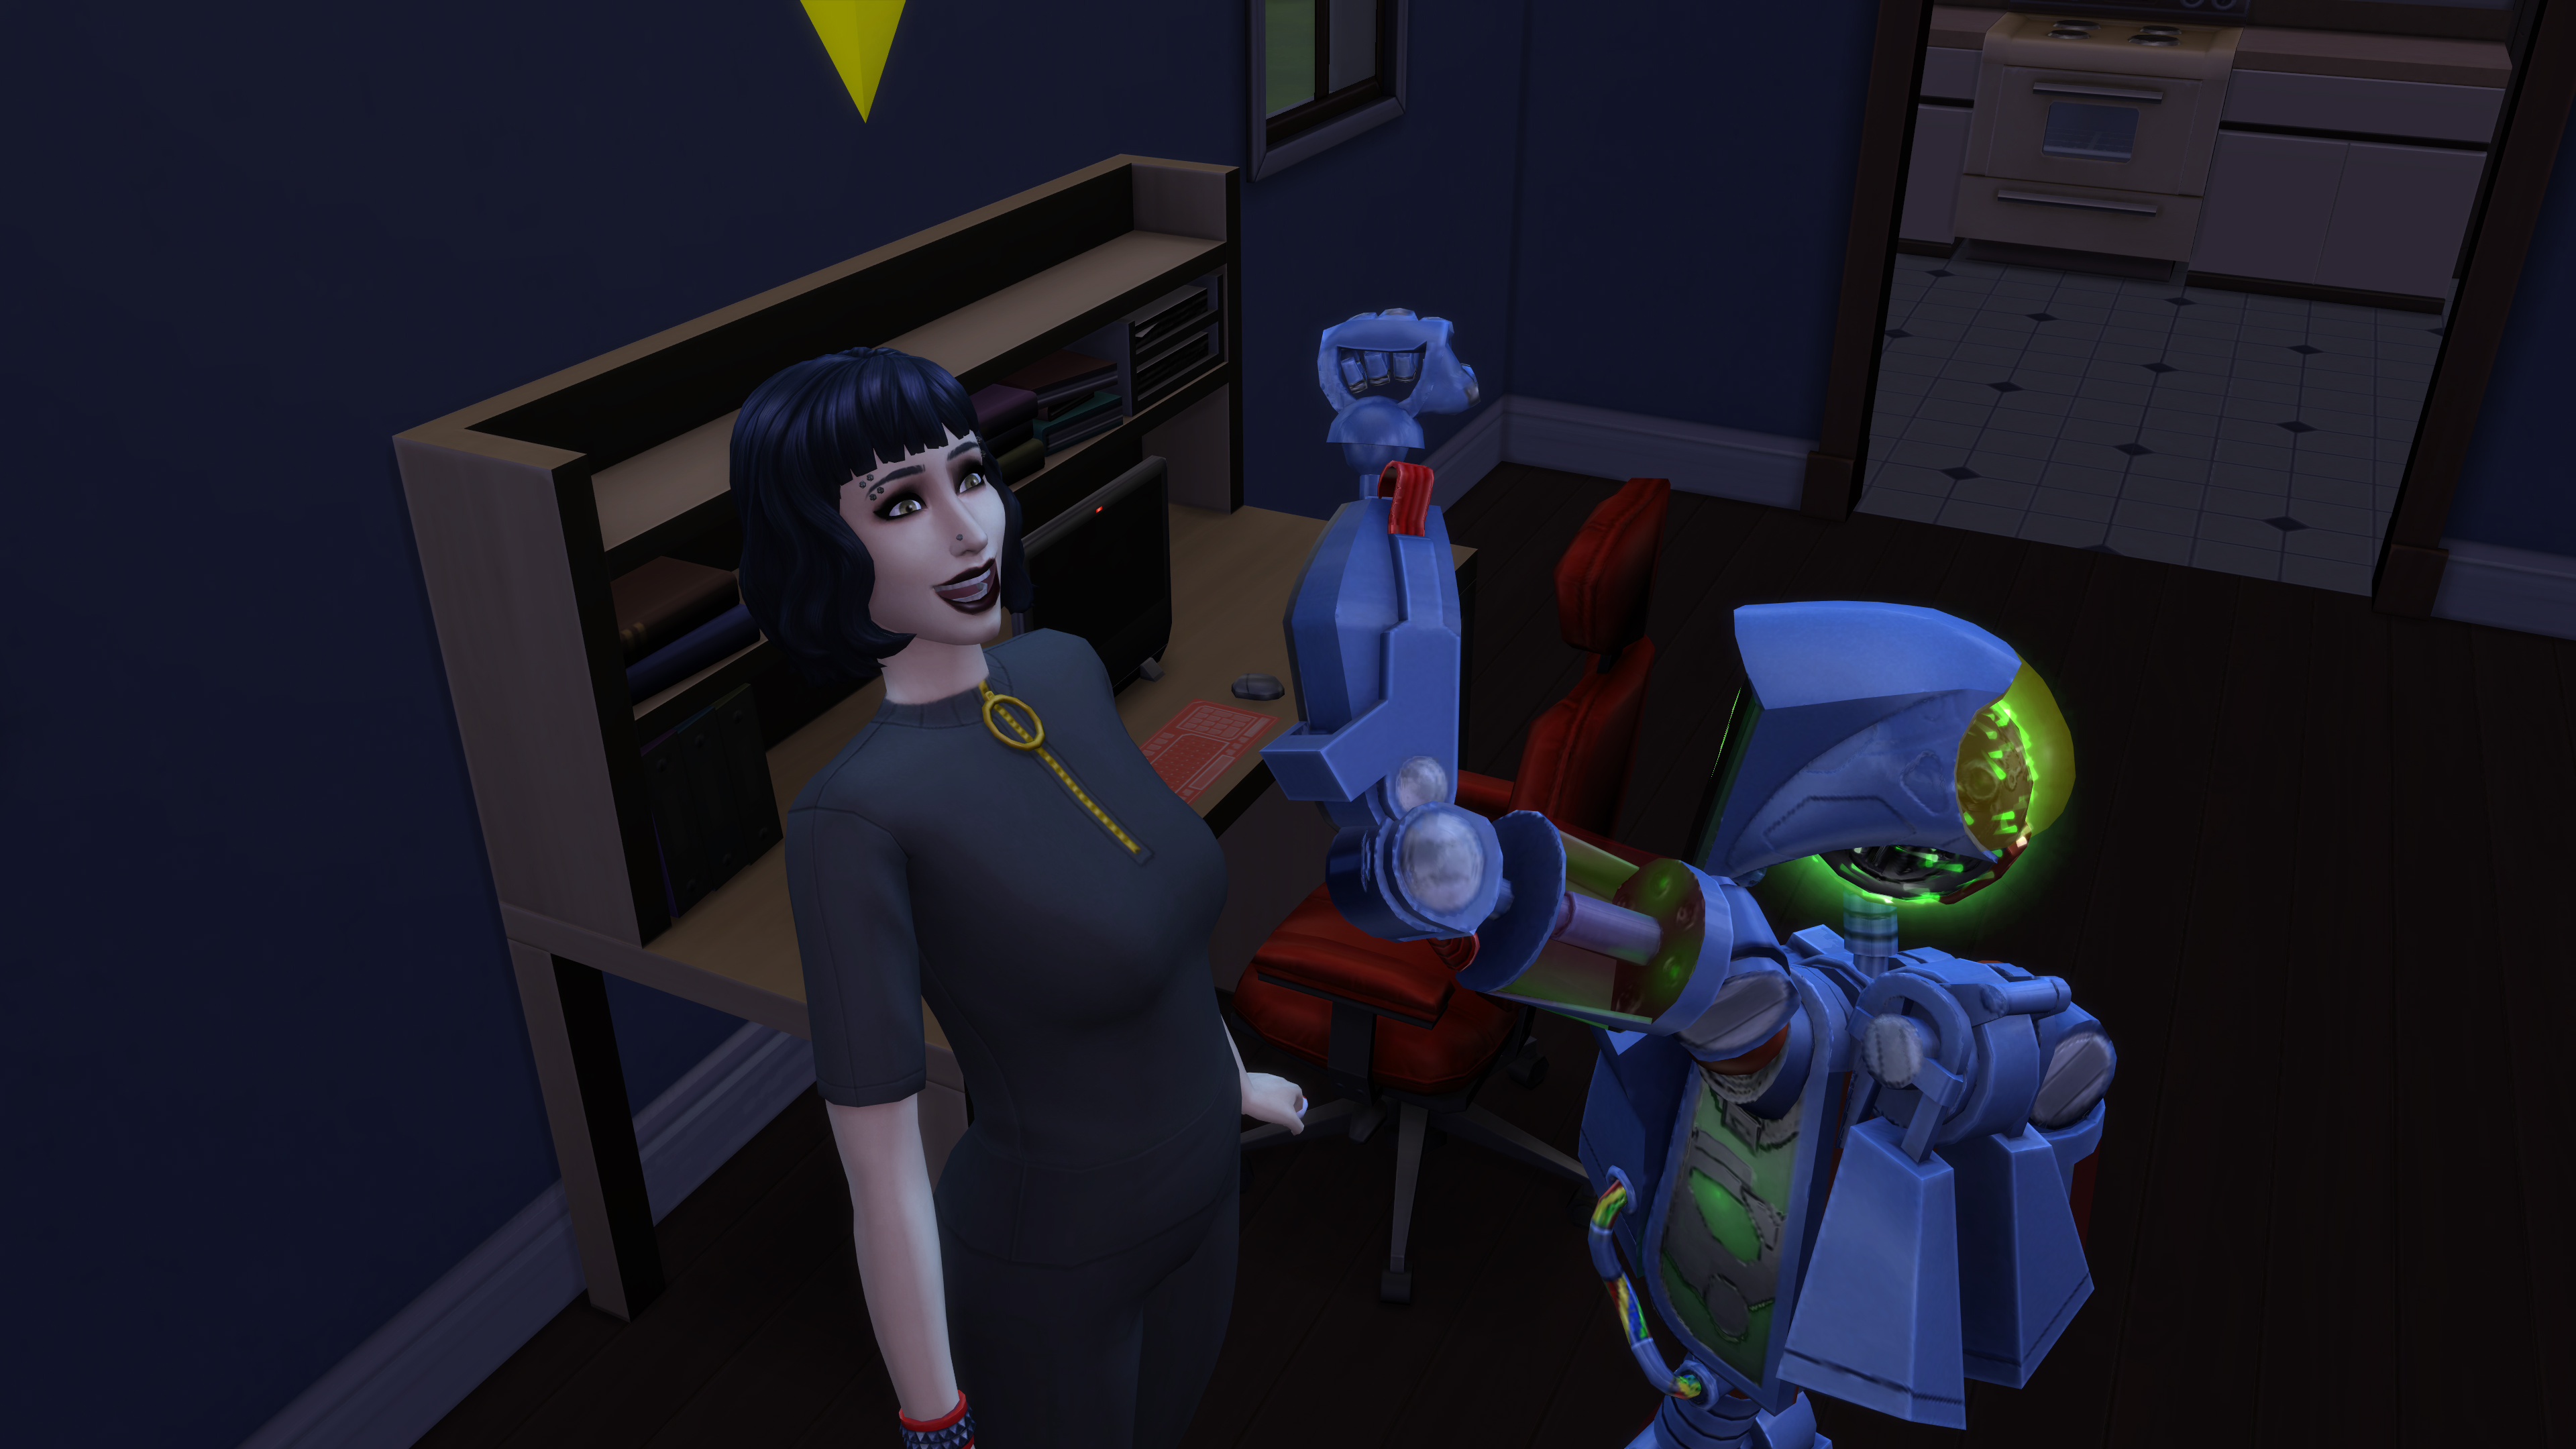  Great moments in PC gaming: Building a robot servant in The Sims 4 